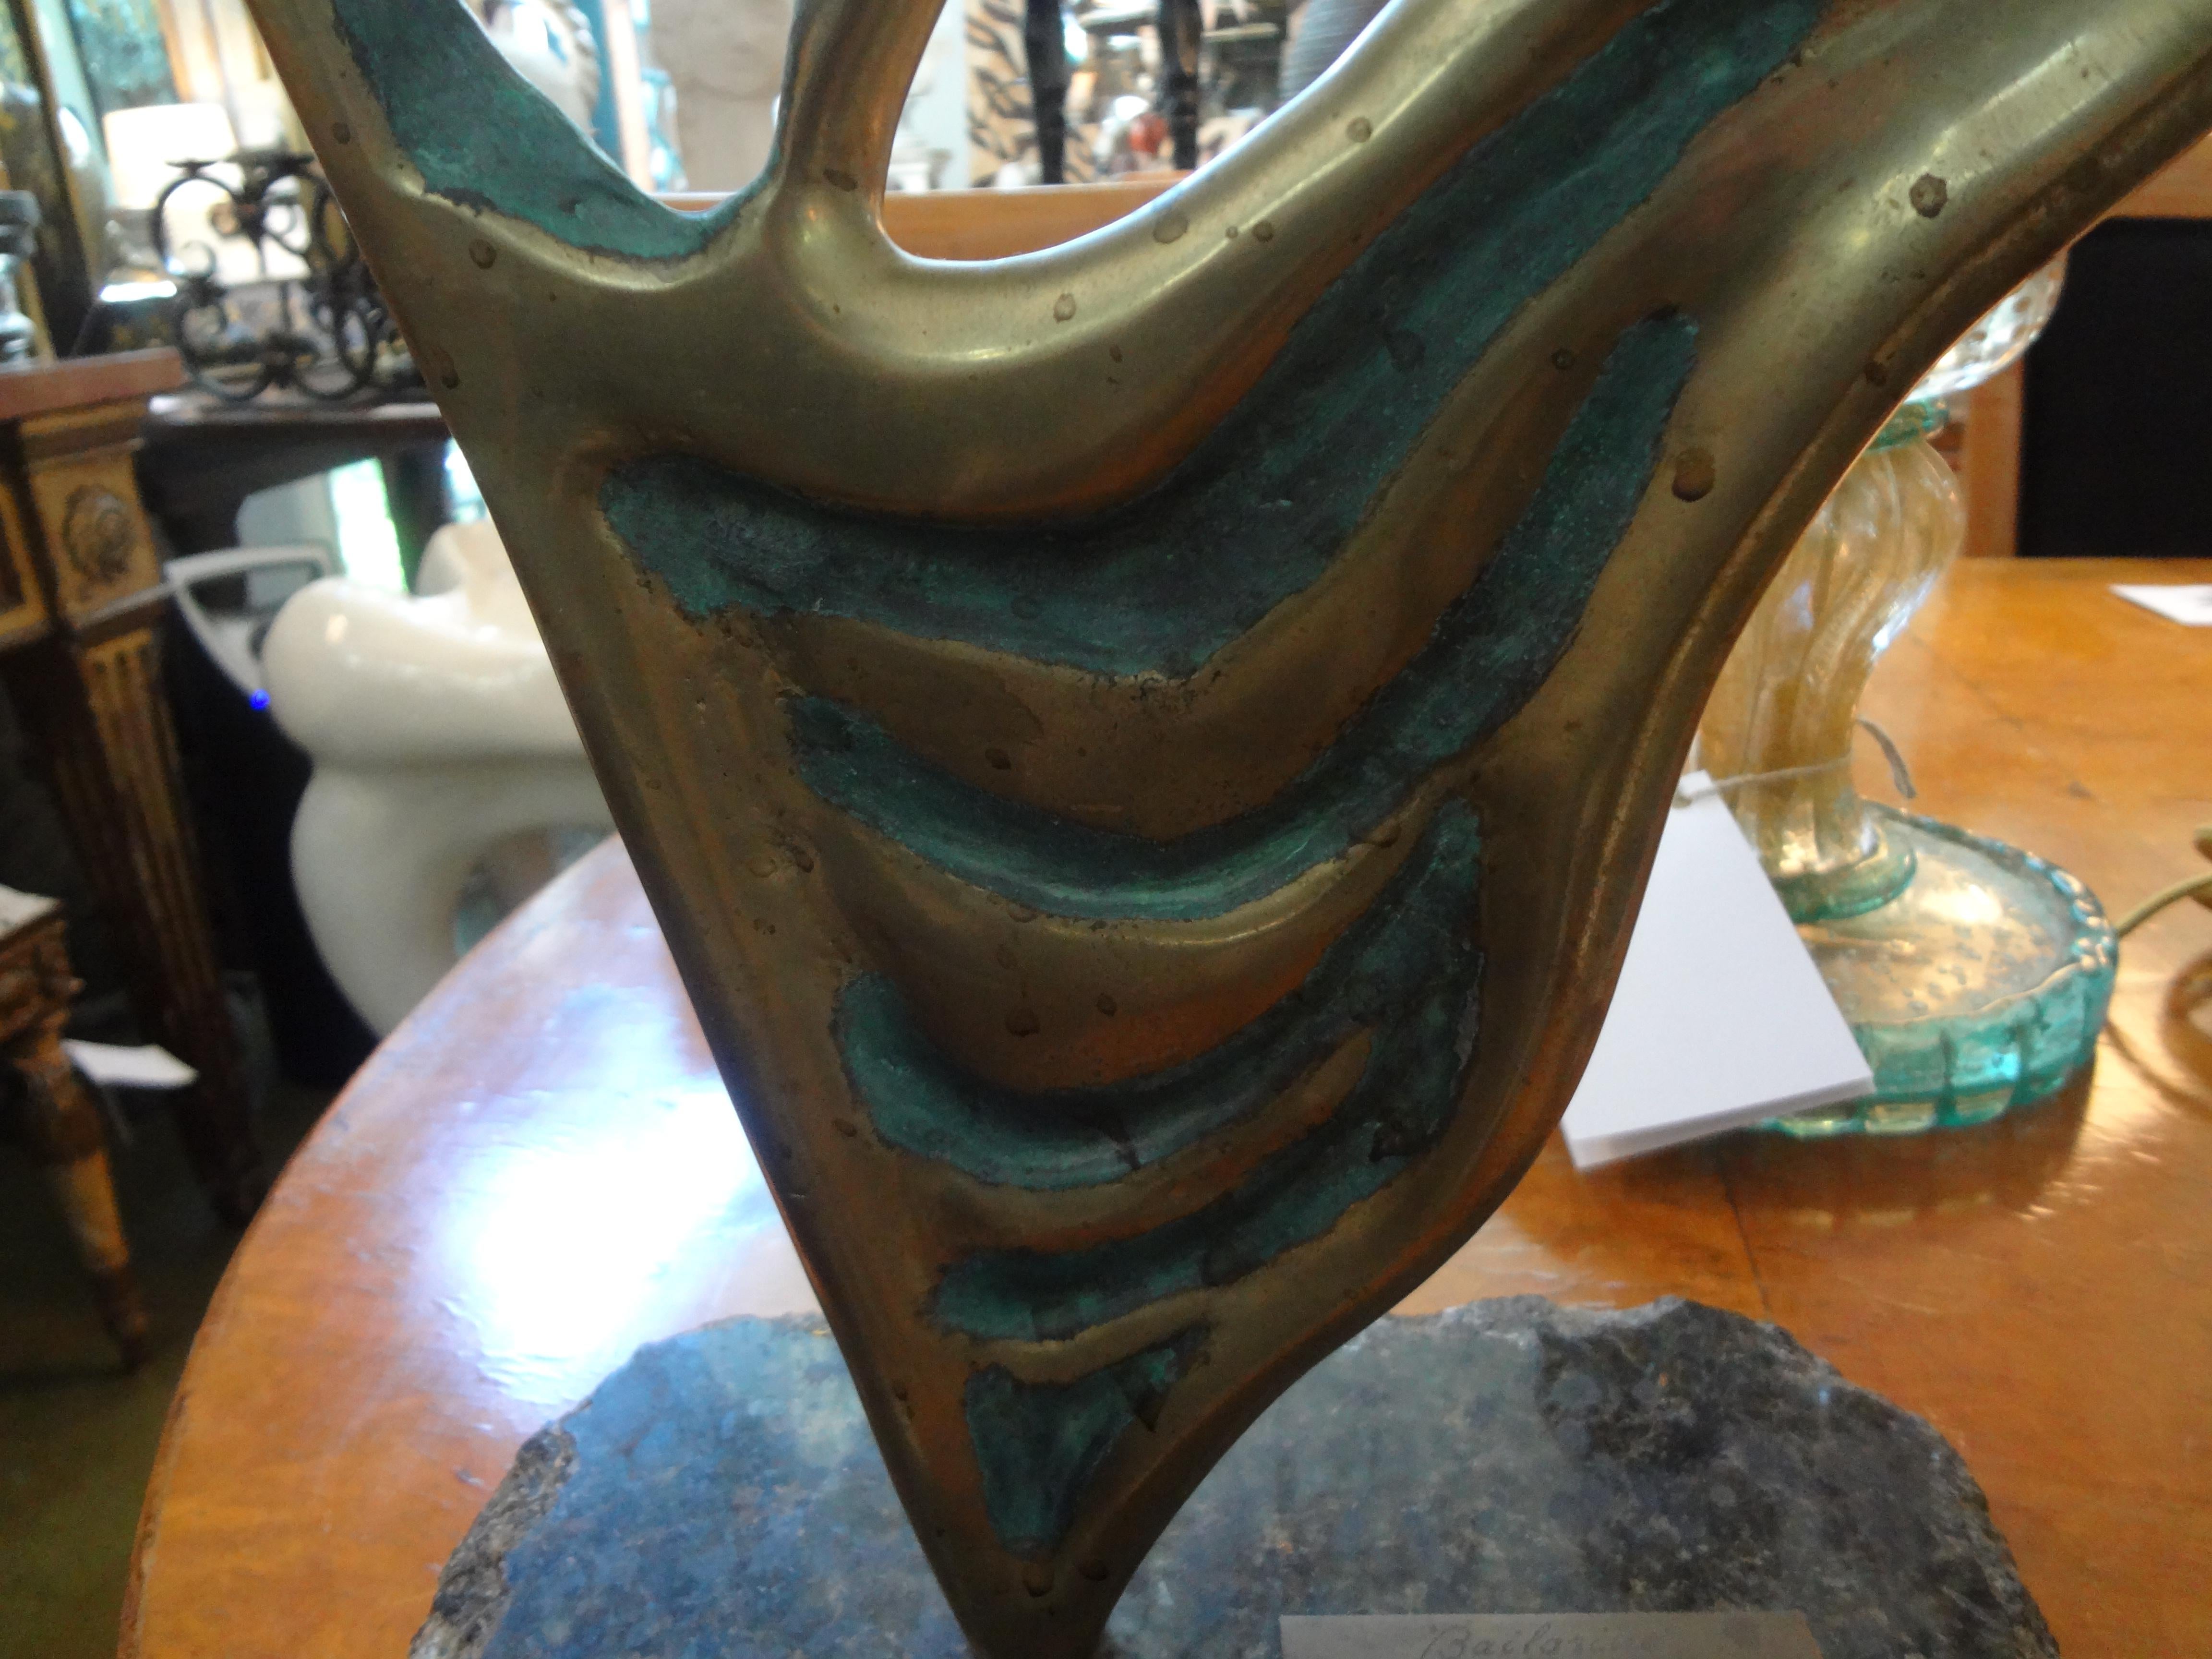 Stunning Mid-Century Modern abstract bronze sculpture on a granite base by Yone Di Alerigi. This bronze sculpture has a plaque with the title, ballerina or ballet dancer and is artist-signed Yone Di Alerigi. Beautiful as a tabletop sculpture or in a